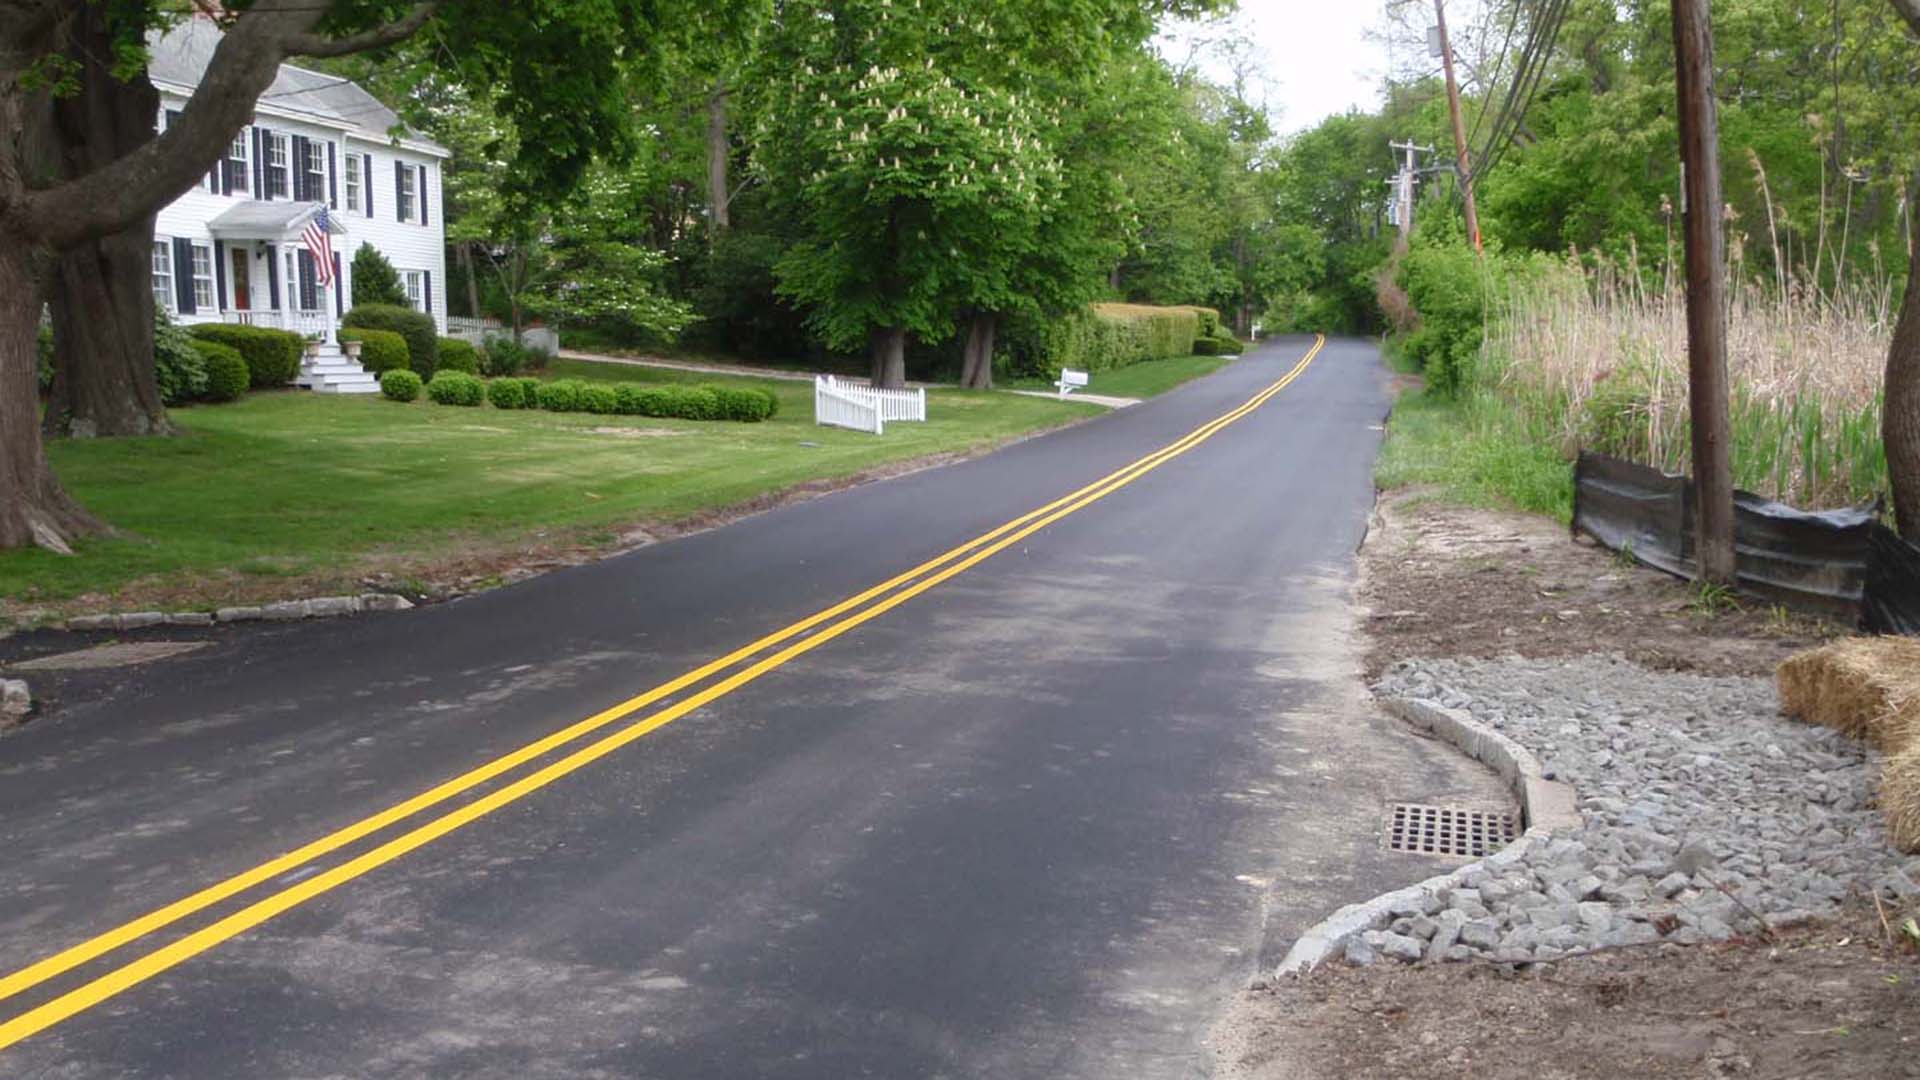 Road and Drainage Improvements Project, Old Field, NY